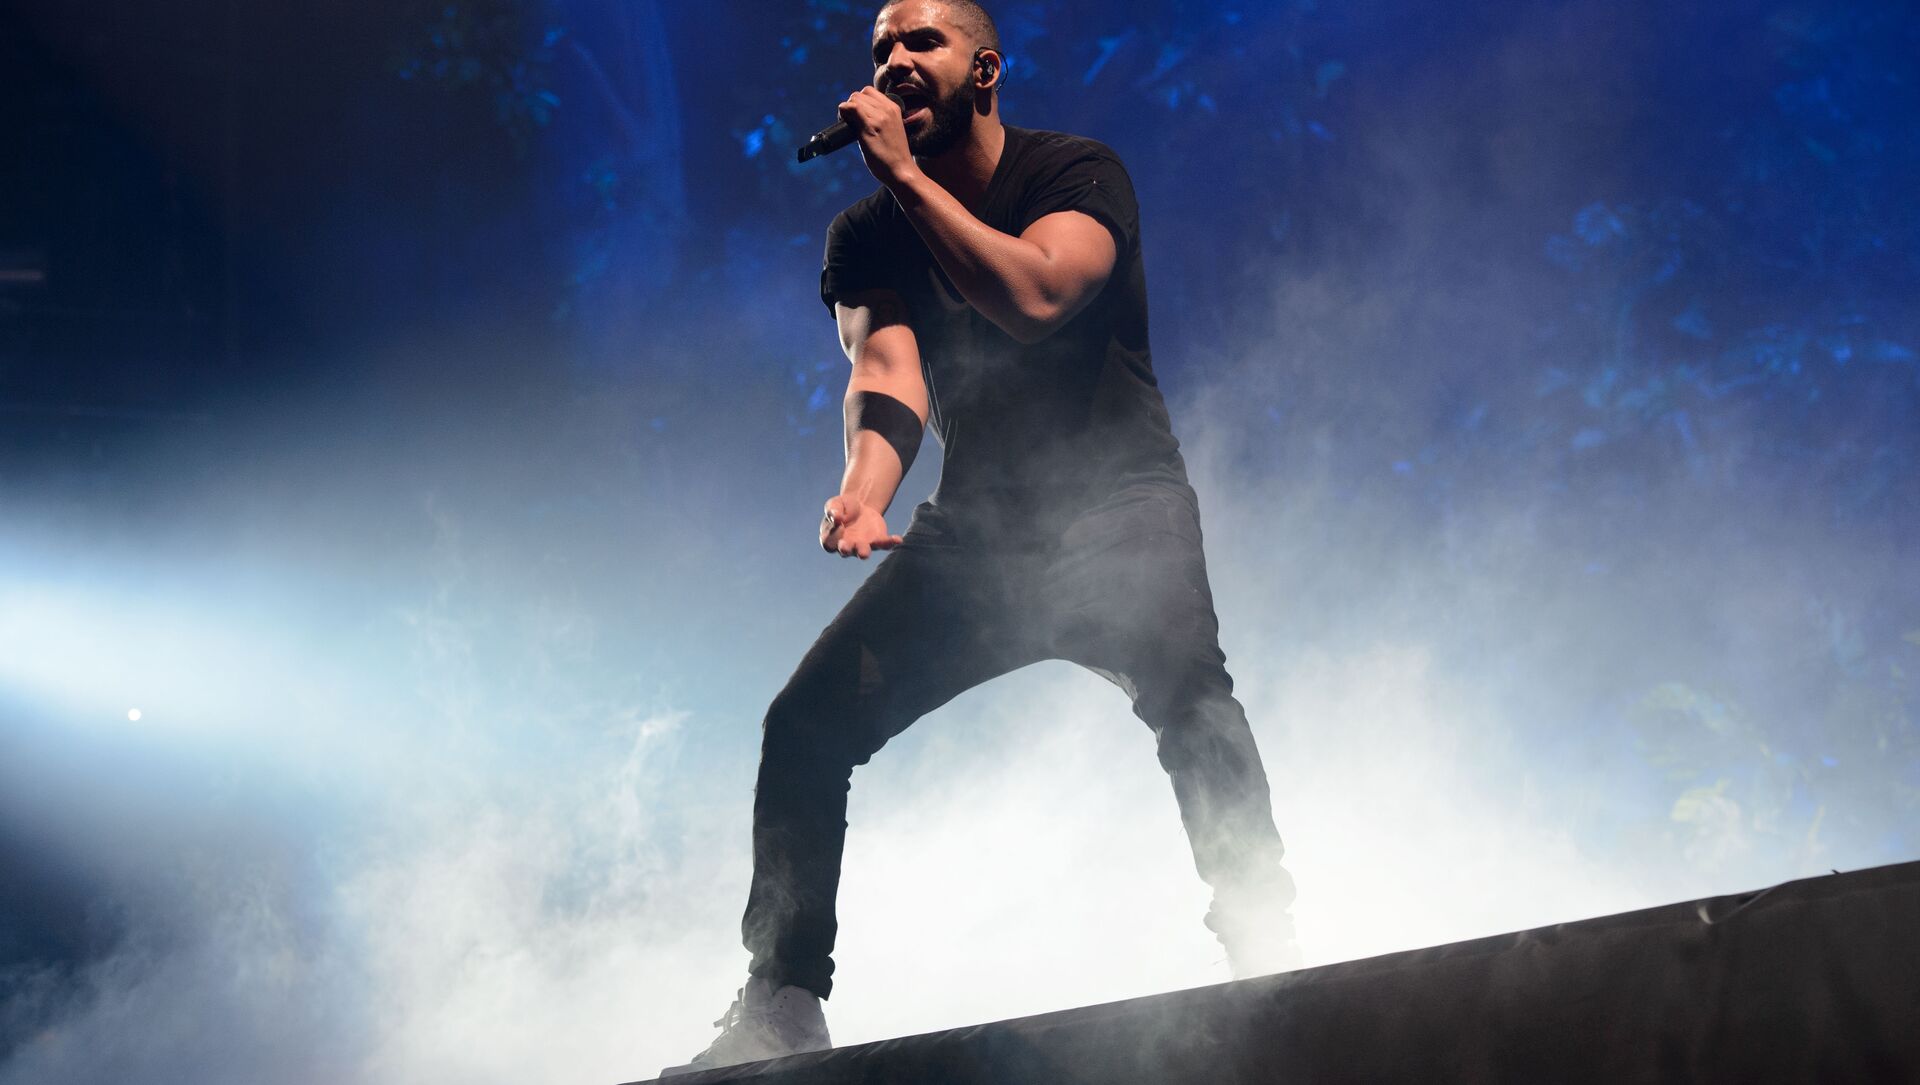 Canadian singer Drake performs on the main stage at Wireless festival in Finsbury Park, London, Sunday, 28 June 2015 - Sputnik International, 1920, 05.09.2021